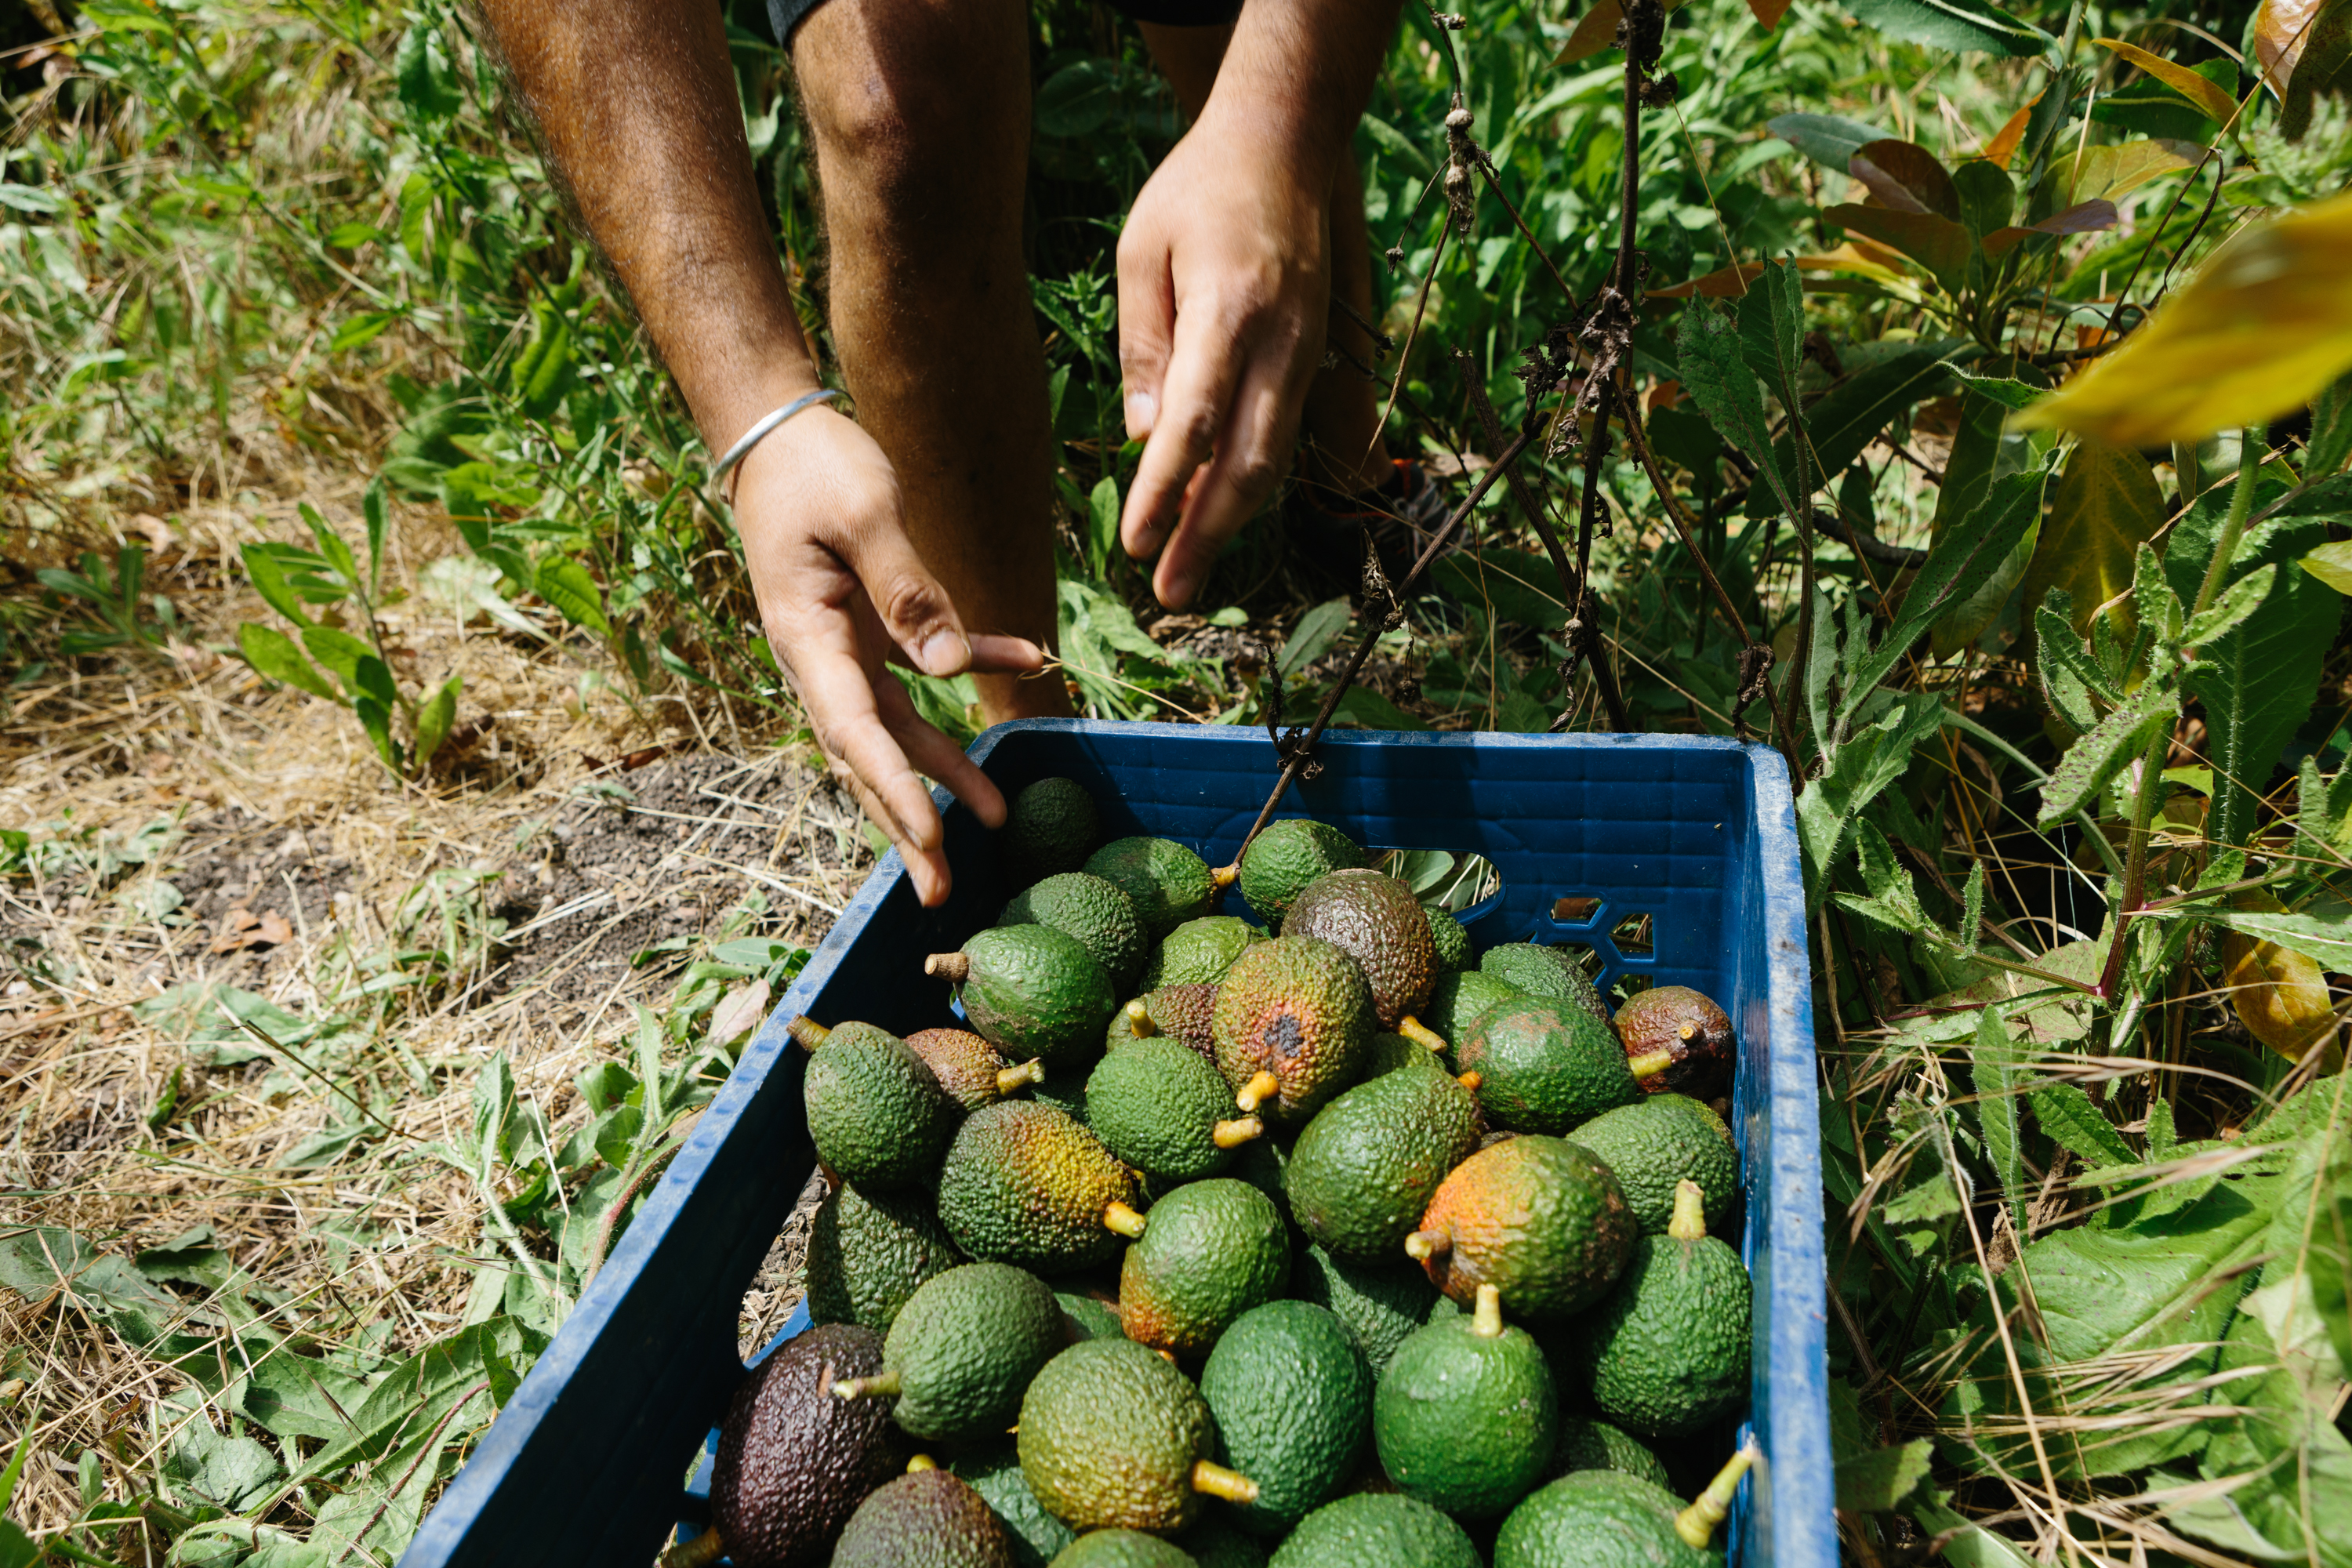 A farmer fills a crate with avocados while picking them in California. (Getty Images/iStockphoto—© Patrick Record 2020)